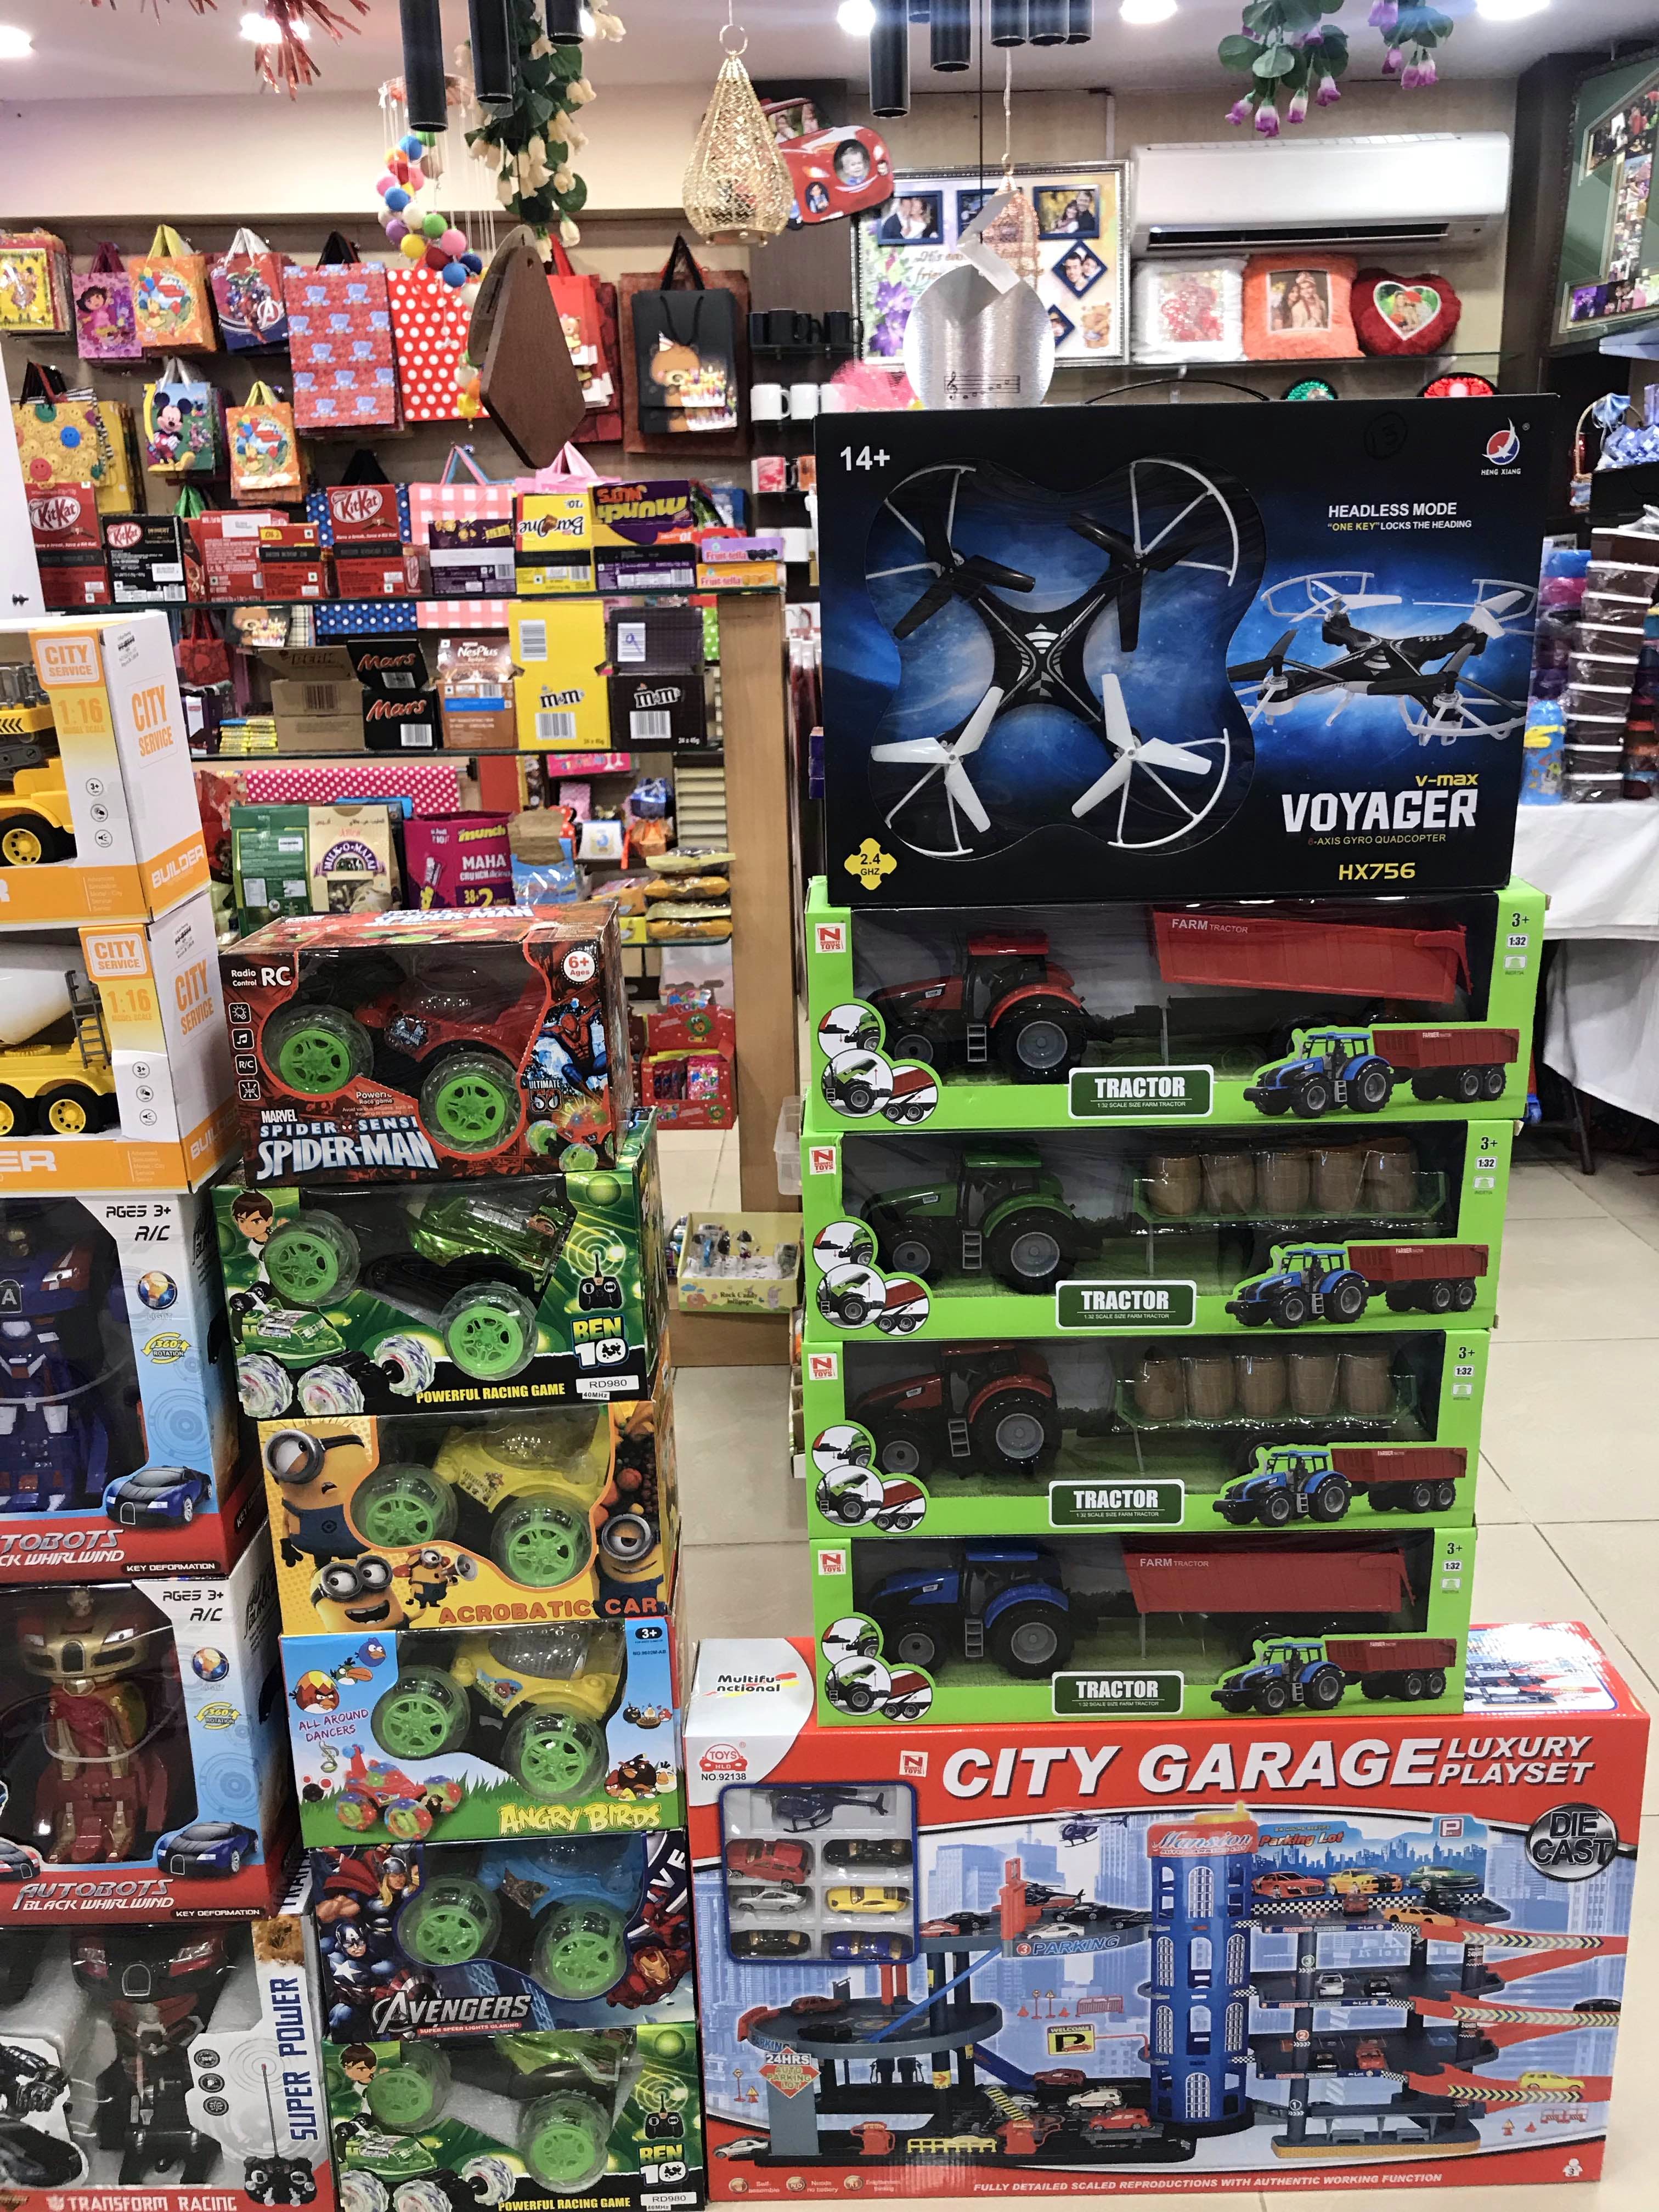 Collection,Retail,Toy,Building